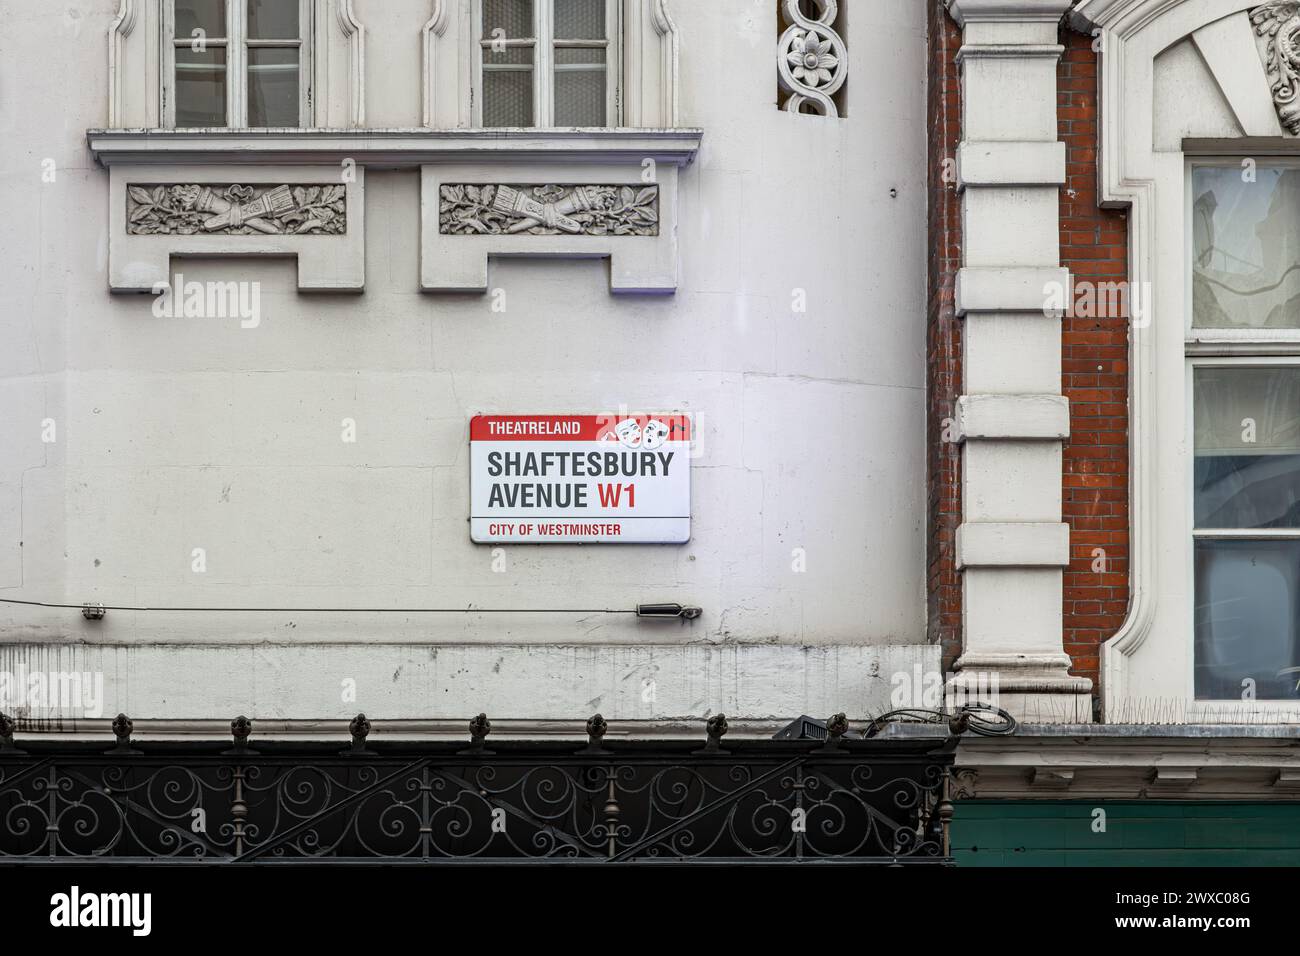 A road sign for Shaftsbury Avenue, home of London's Theatreland. London theatre, performance, entertainment, travel or tourism concept. Stock Photo